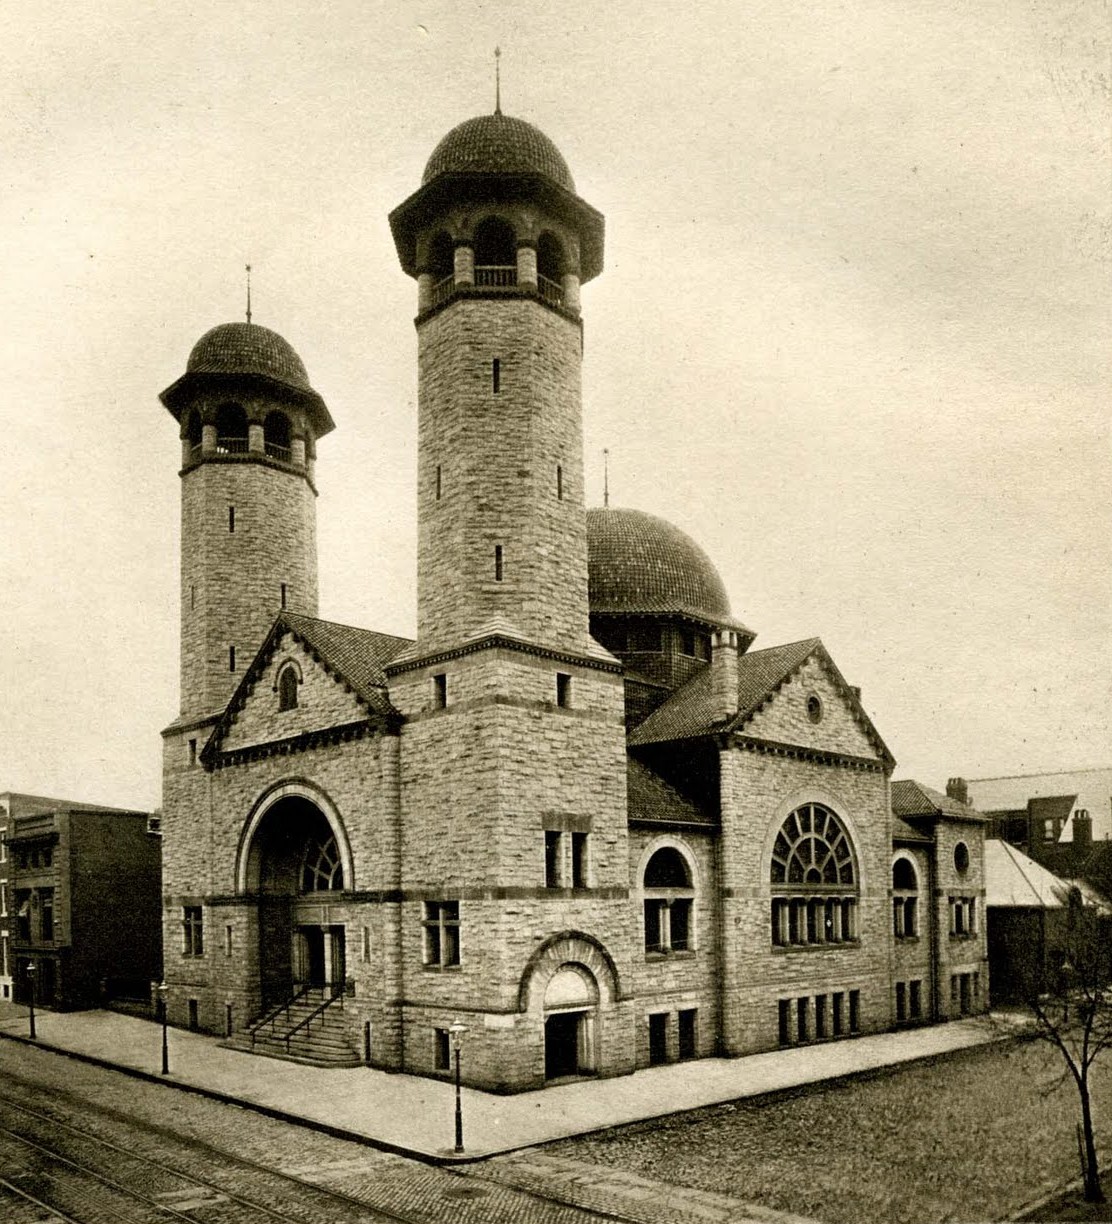 Baltimore Hebrew Congregation Synagogue built at 1901 Madison Avenue in 1890. Courtesy Jewish Museum of Maryland.